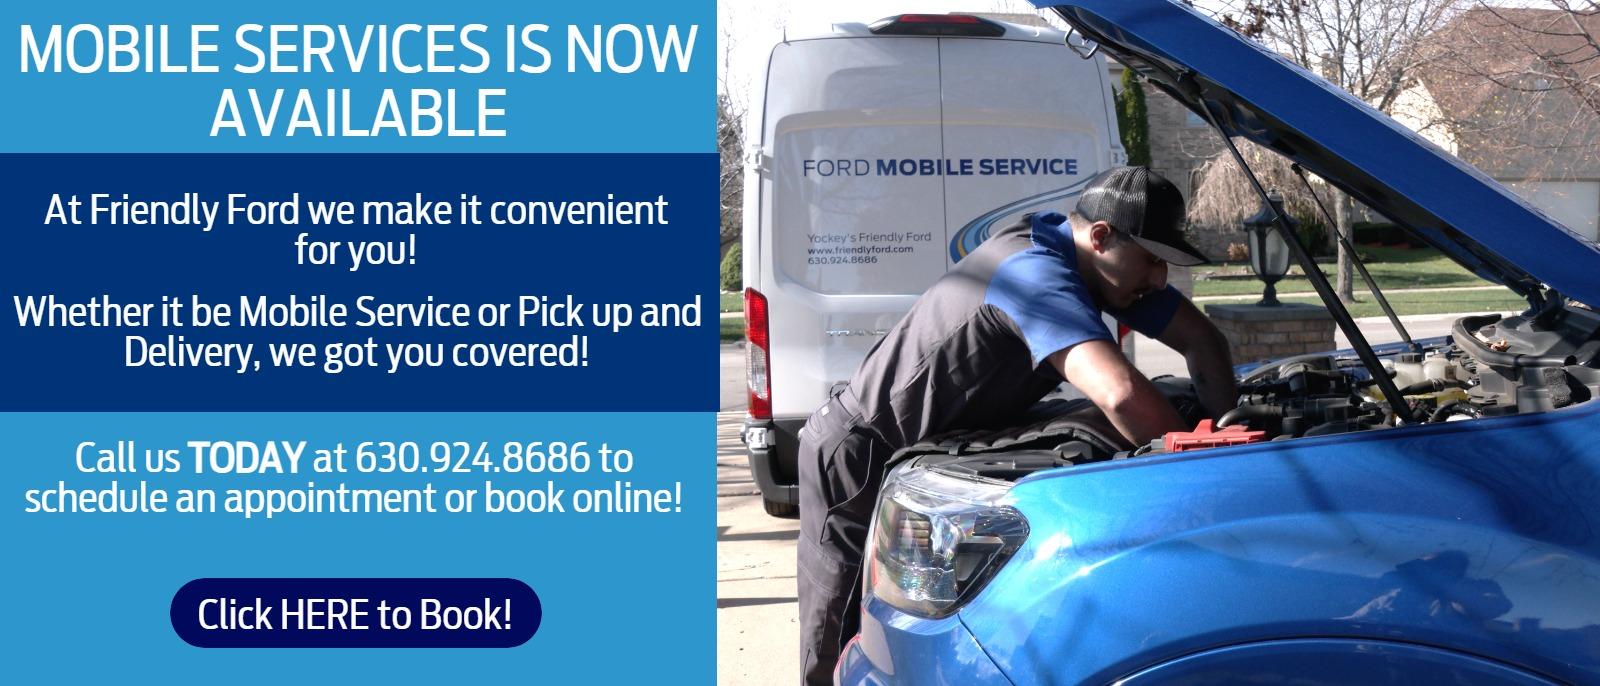 Mobile Service is HERE!
At Friendly Ford we make it convenient for you! Whether it be Mobile Service or Pick up and Delivery, we got you covered!
Call us TODAY at 630.924.8686 to schedule an appointment or book online!